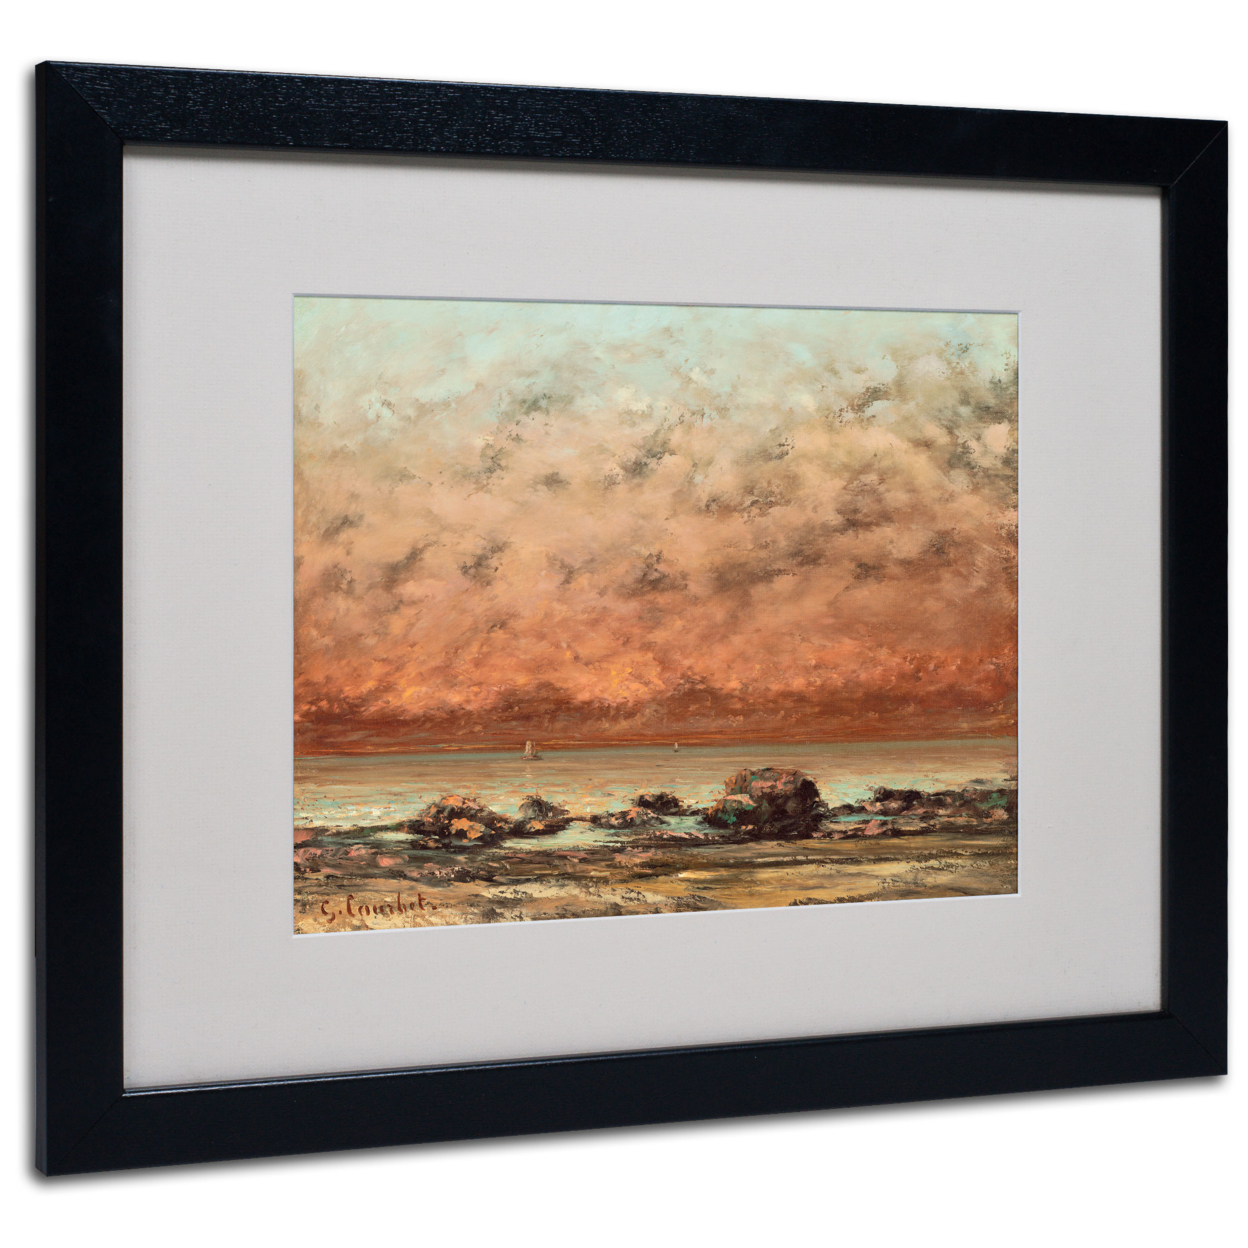 Gustave Courbet 'Black Rocks At Trouville' Black Wooden Framed Art 18 X 22 Inches